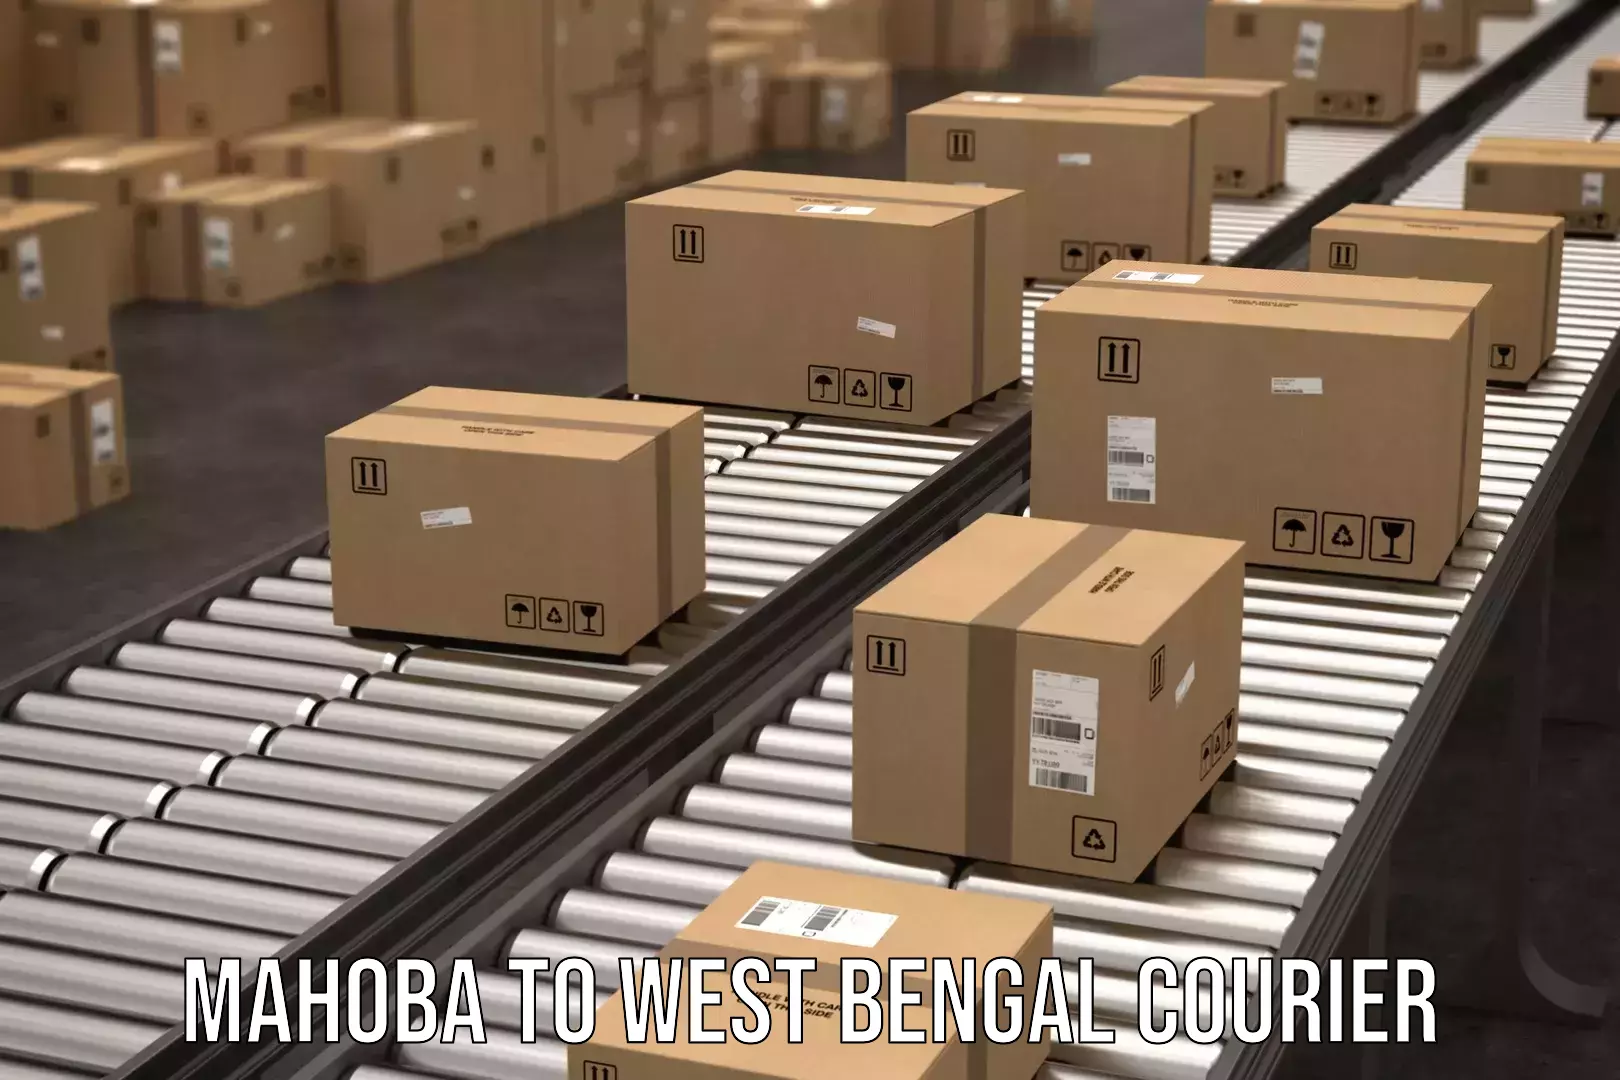 Global courier networks Mahoba to Serampore